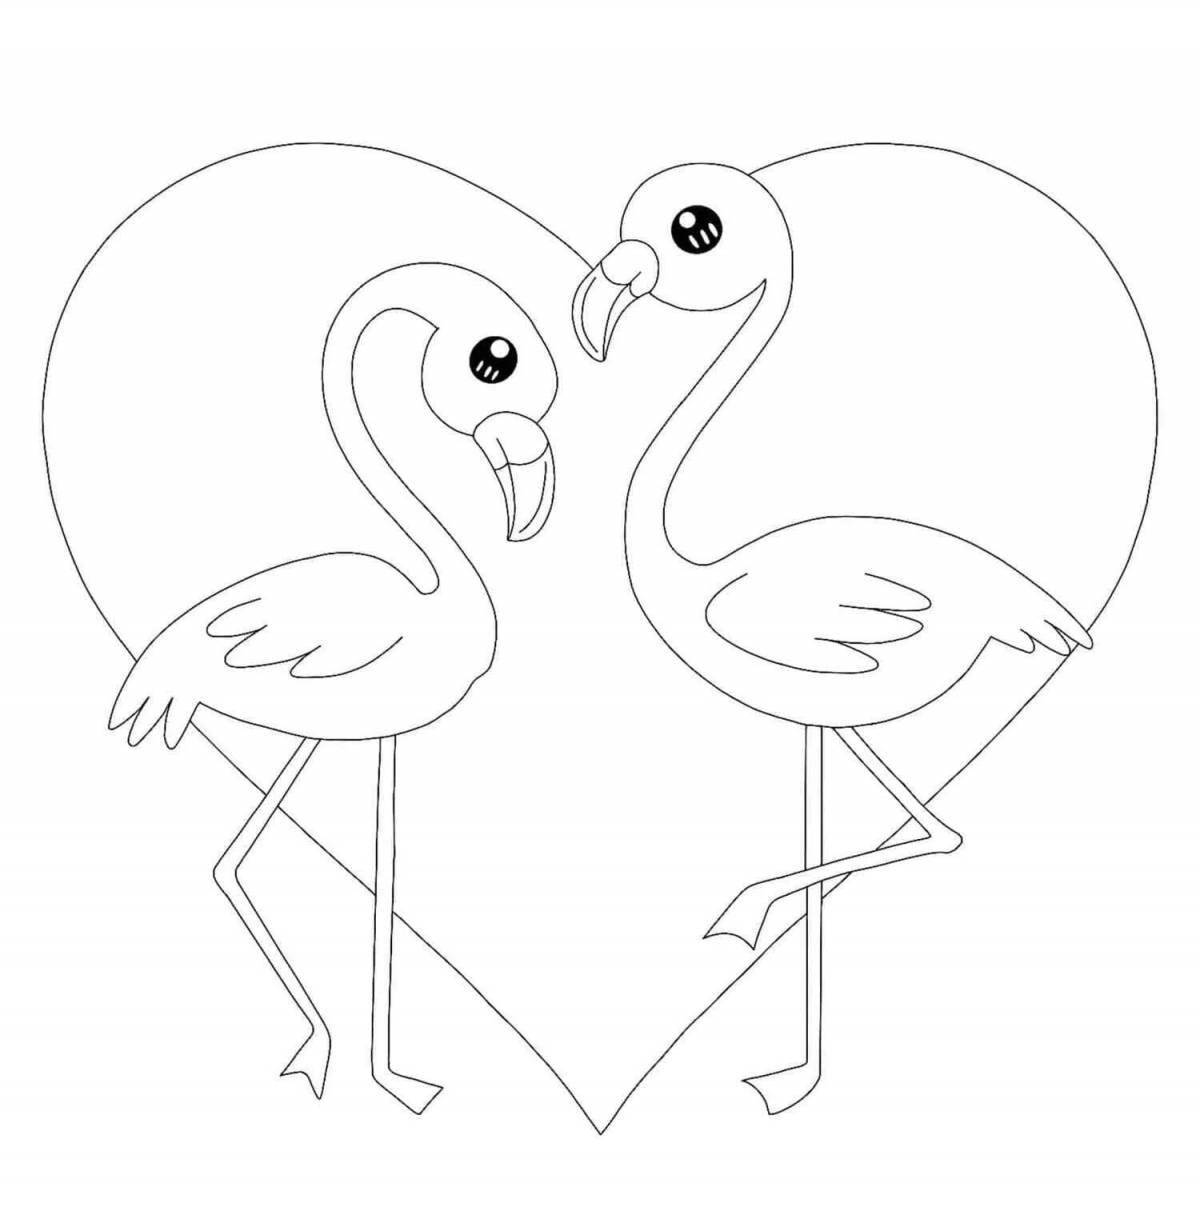 Fabulous pink flamingo coloring page